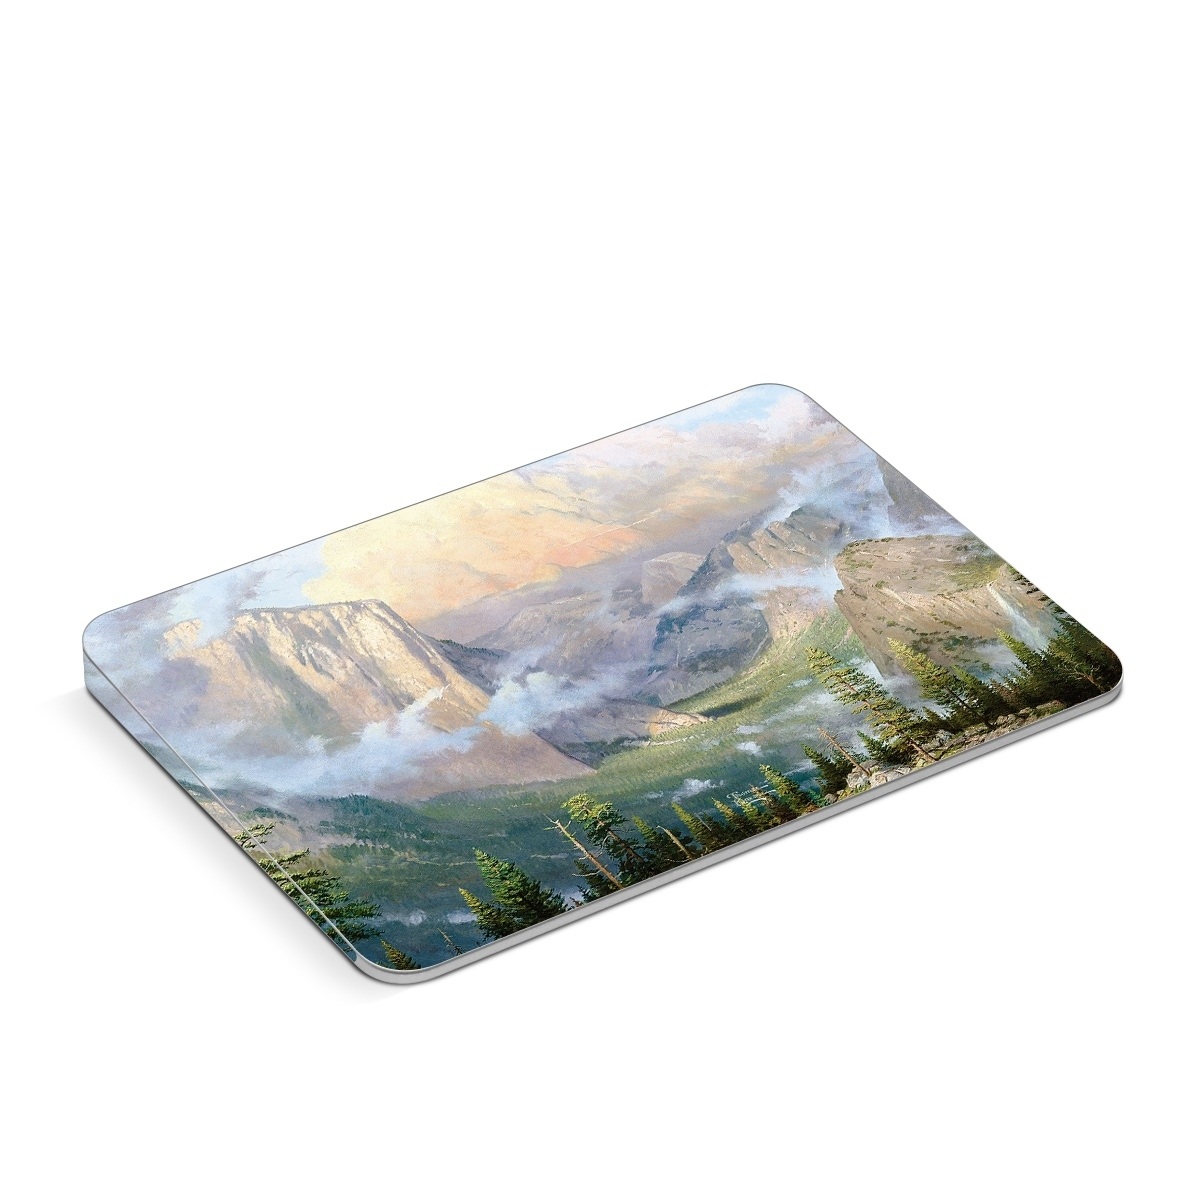 Apple Magic Trackpad Skin design of Mountainous landforms, Natural landscape, Mountain, Nature, Sky, Painting, Highland, Atmospheric phenomenon, Wilderness, Valley, with gray, black, pink, purple, yellow, green colors